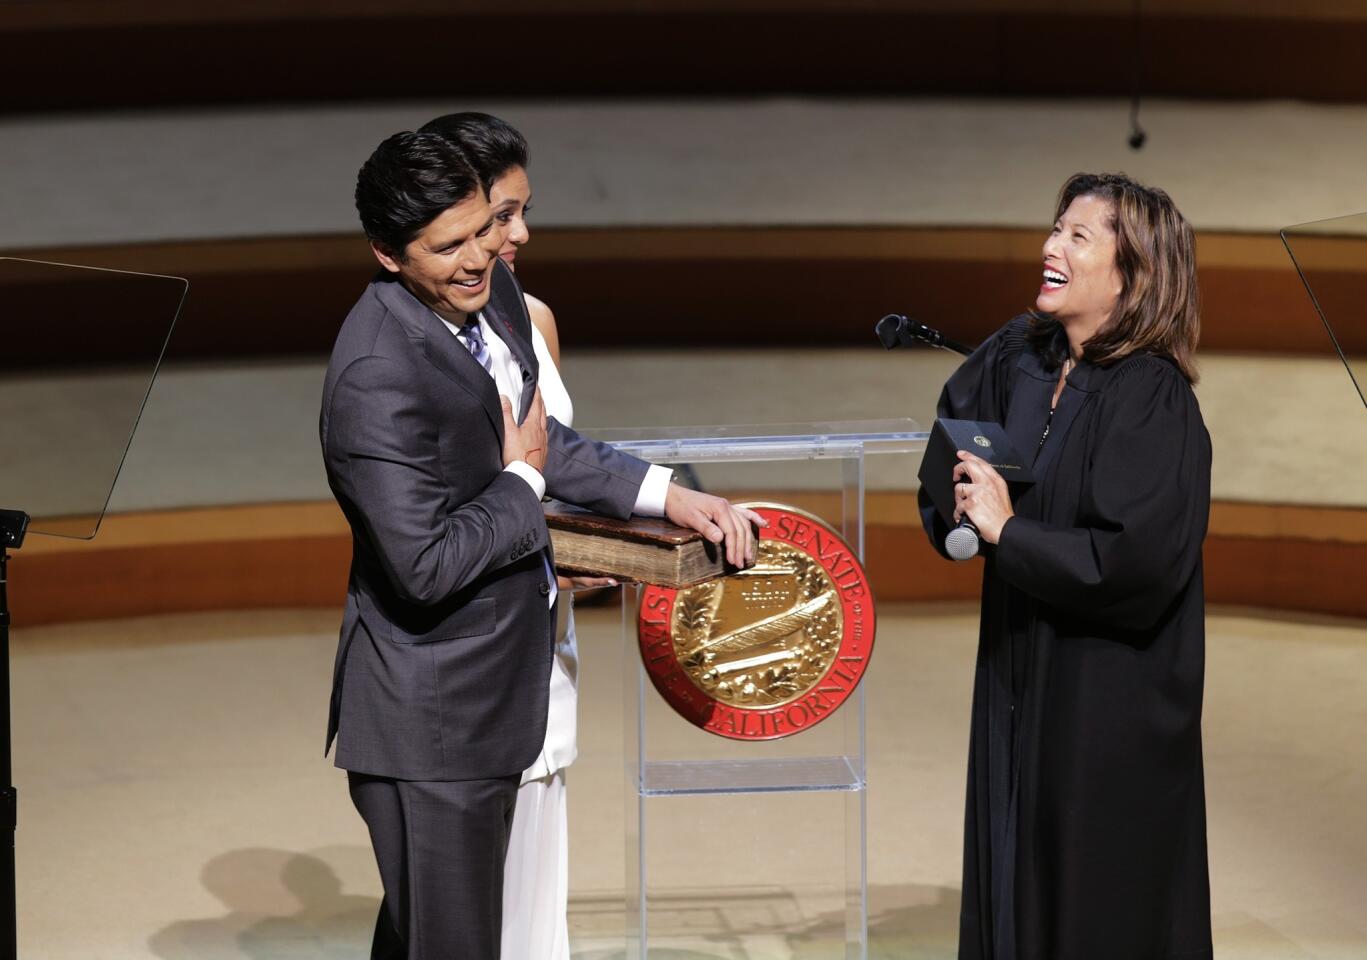 State Sen. Kevin de León of Los Angeles shares a light-hearted moment with Chief Justice Tani Cantil-Sakauye, right, and his daughter Lluvia Carrasco before he is sworn in as the 47th president pro tempore of the California Senate at Walt Disney Concert Hall.